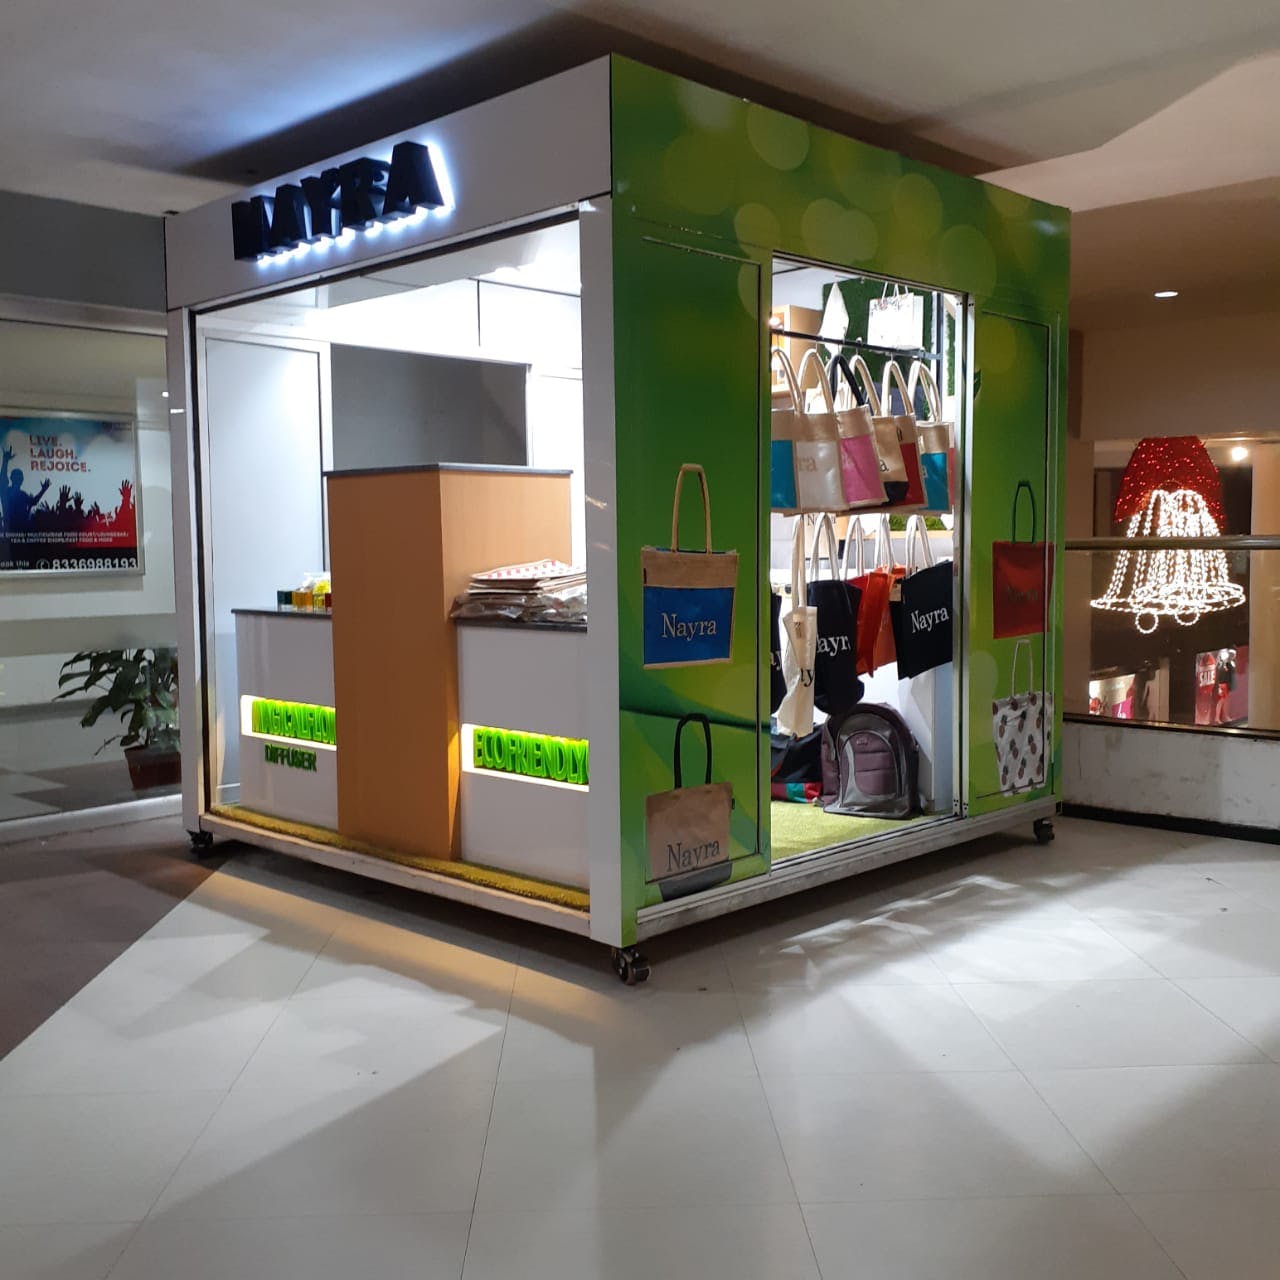 Building,Product,Interior design,Retail,Display case,Room,Outlet store,Kiosk,Shopping mall,Furniture